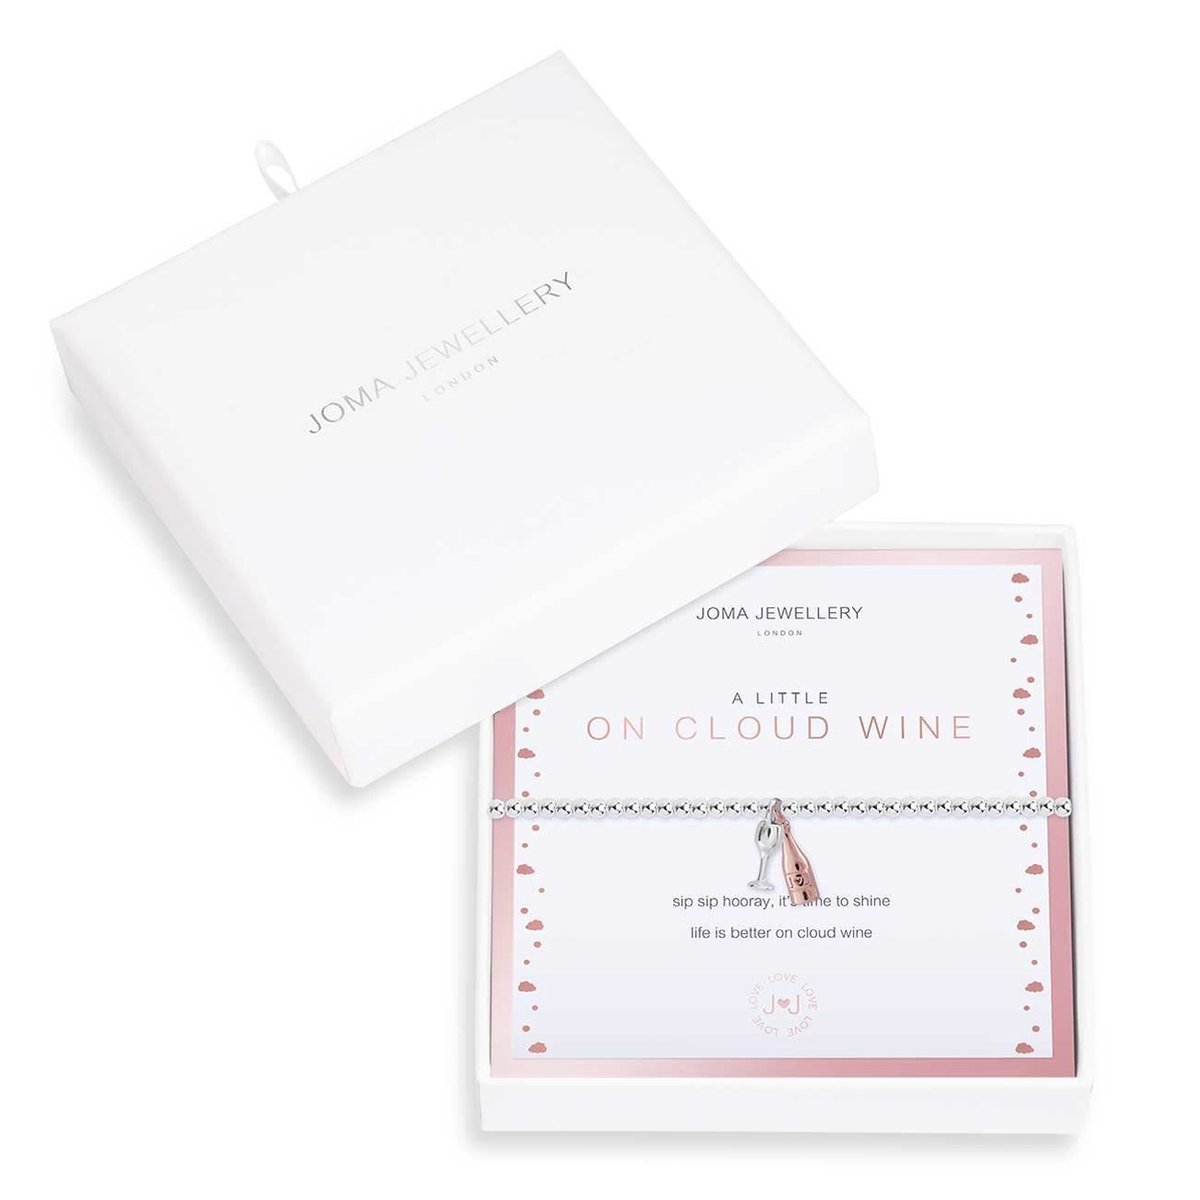 Joma Jewellery Boxed A Little - On Cloud Wine